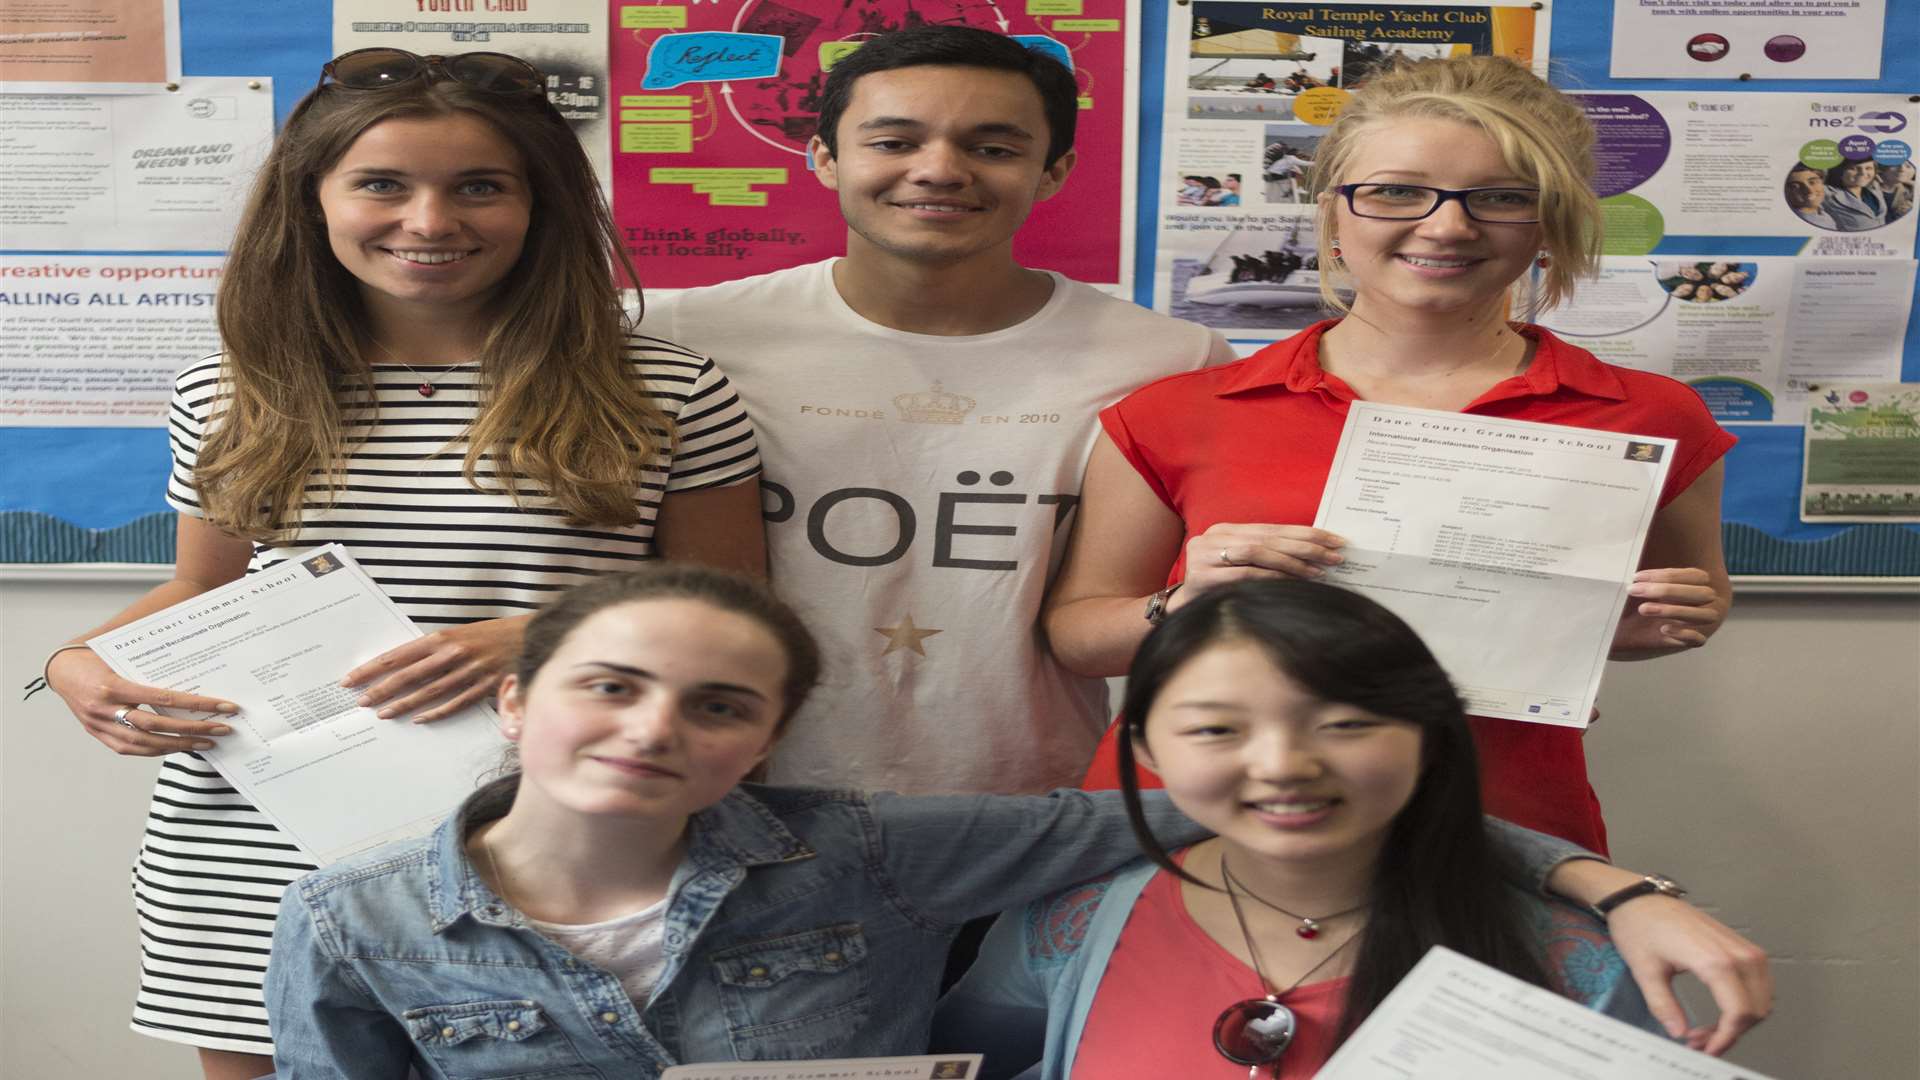 Dane Court Grammar School students with their results: (Back row) Abigail Baker, Shayan Ashfaque and Leonie Lewis. (Front row) Irma Cechladze and Yu Meng Li